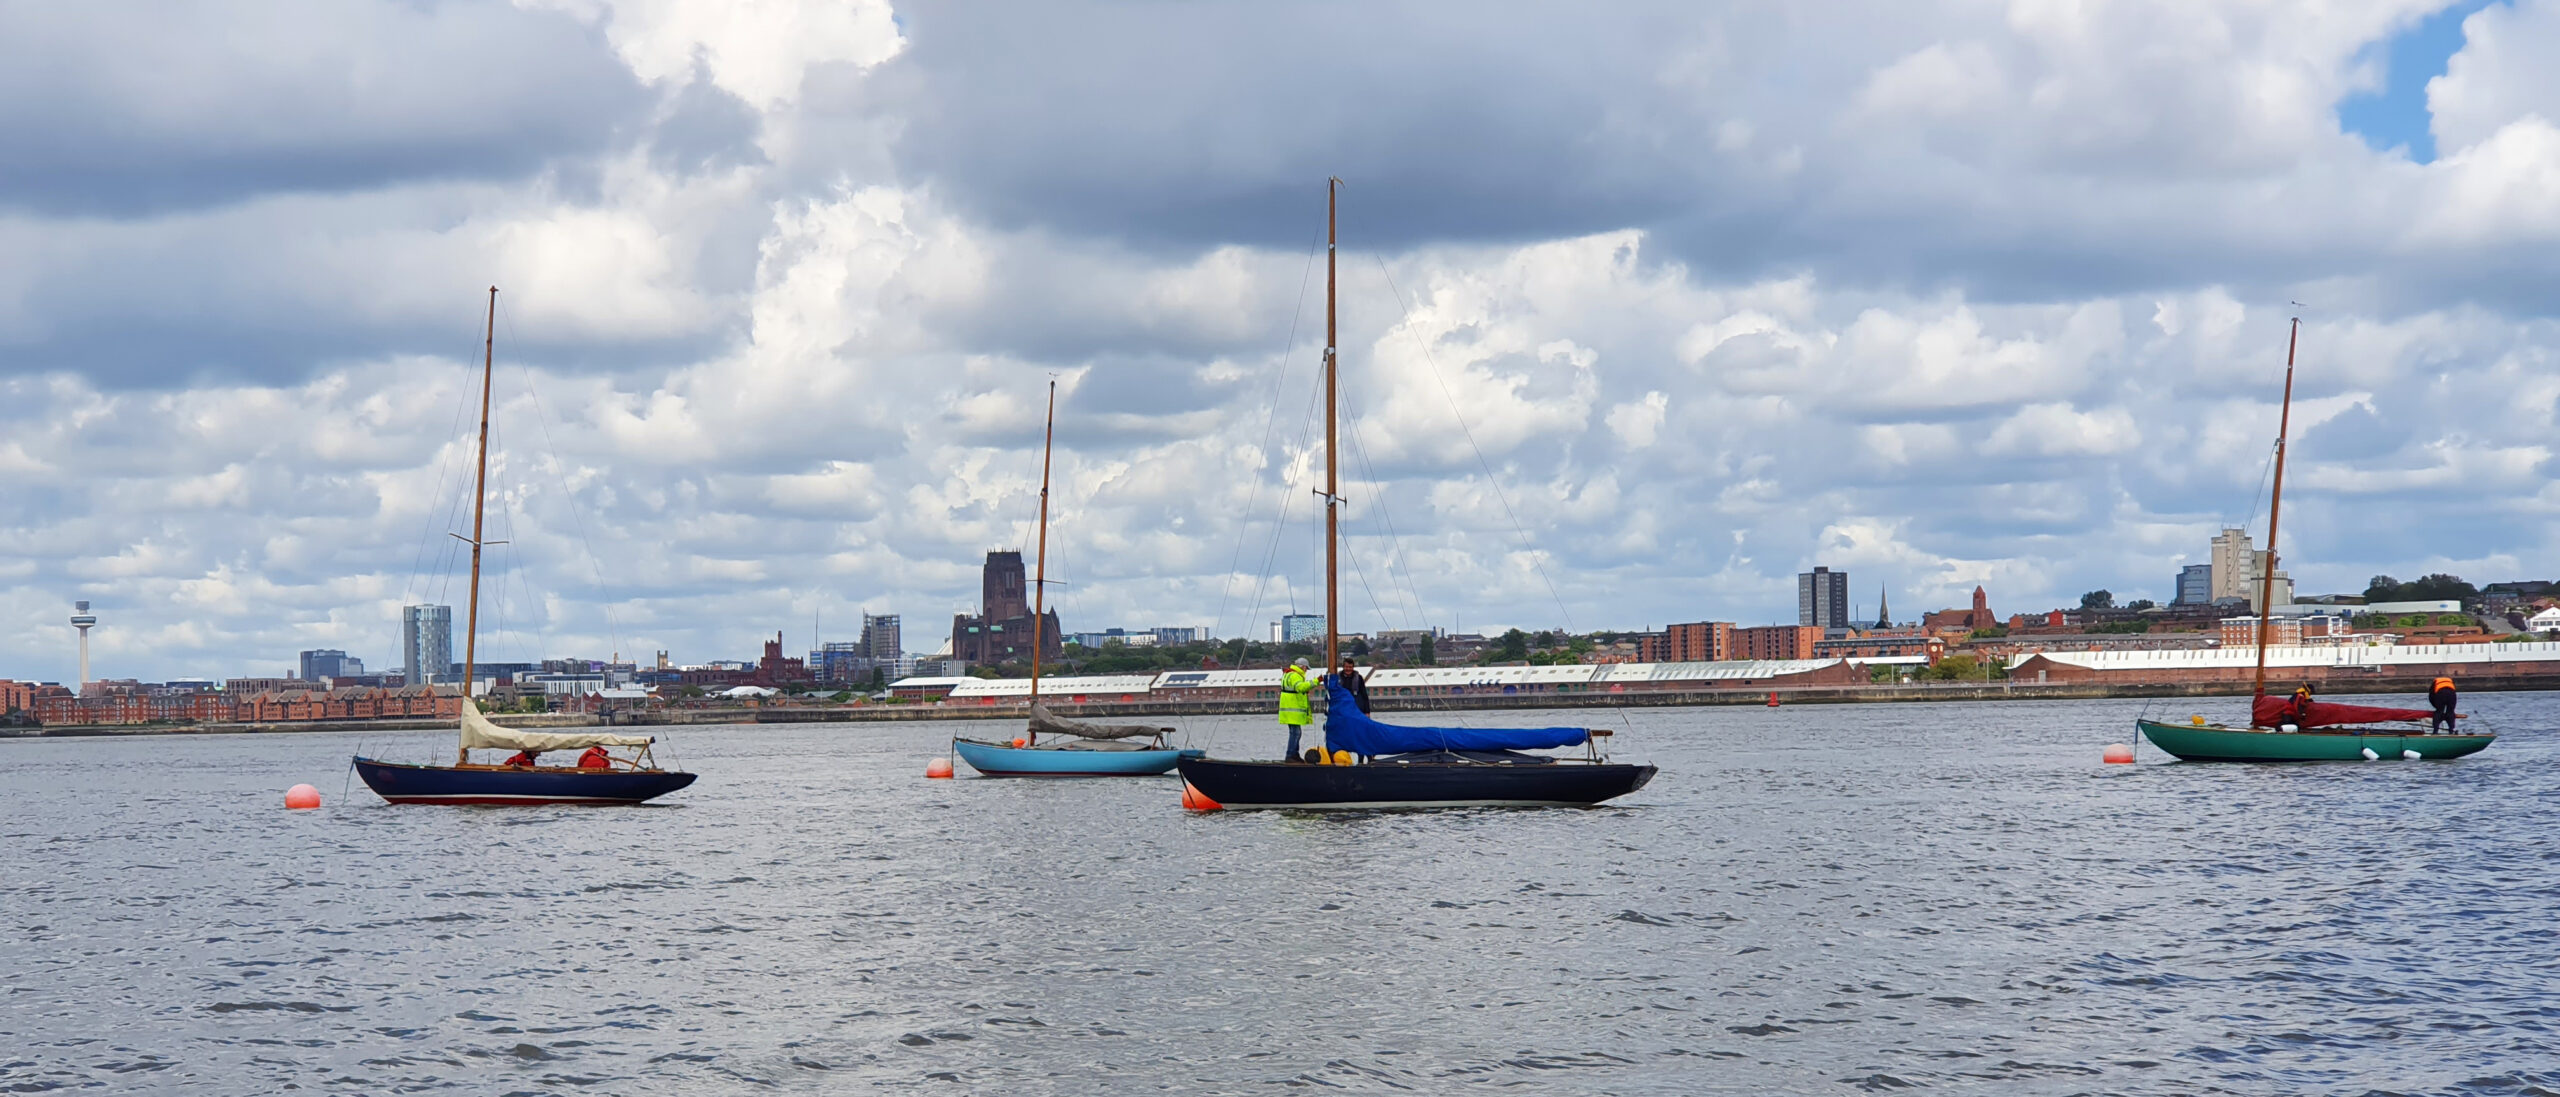 Mylne moorings and Liverpool cathedral